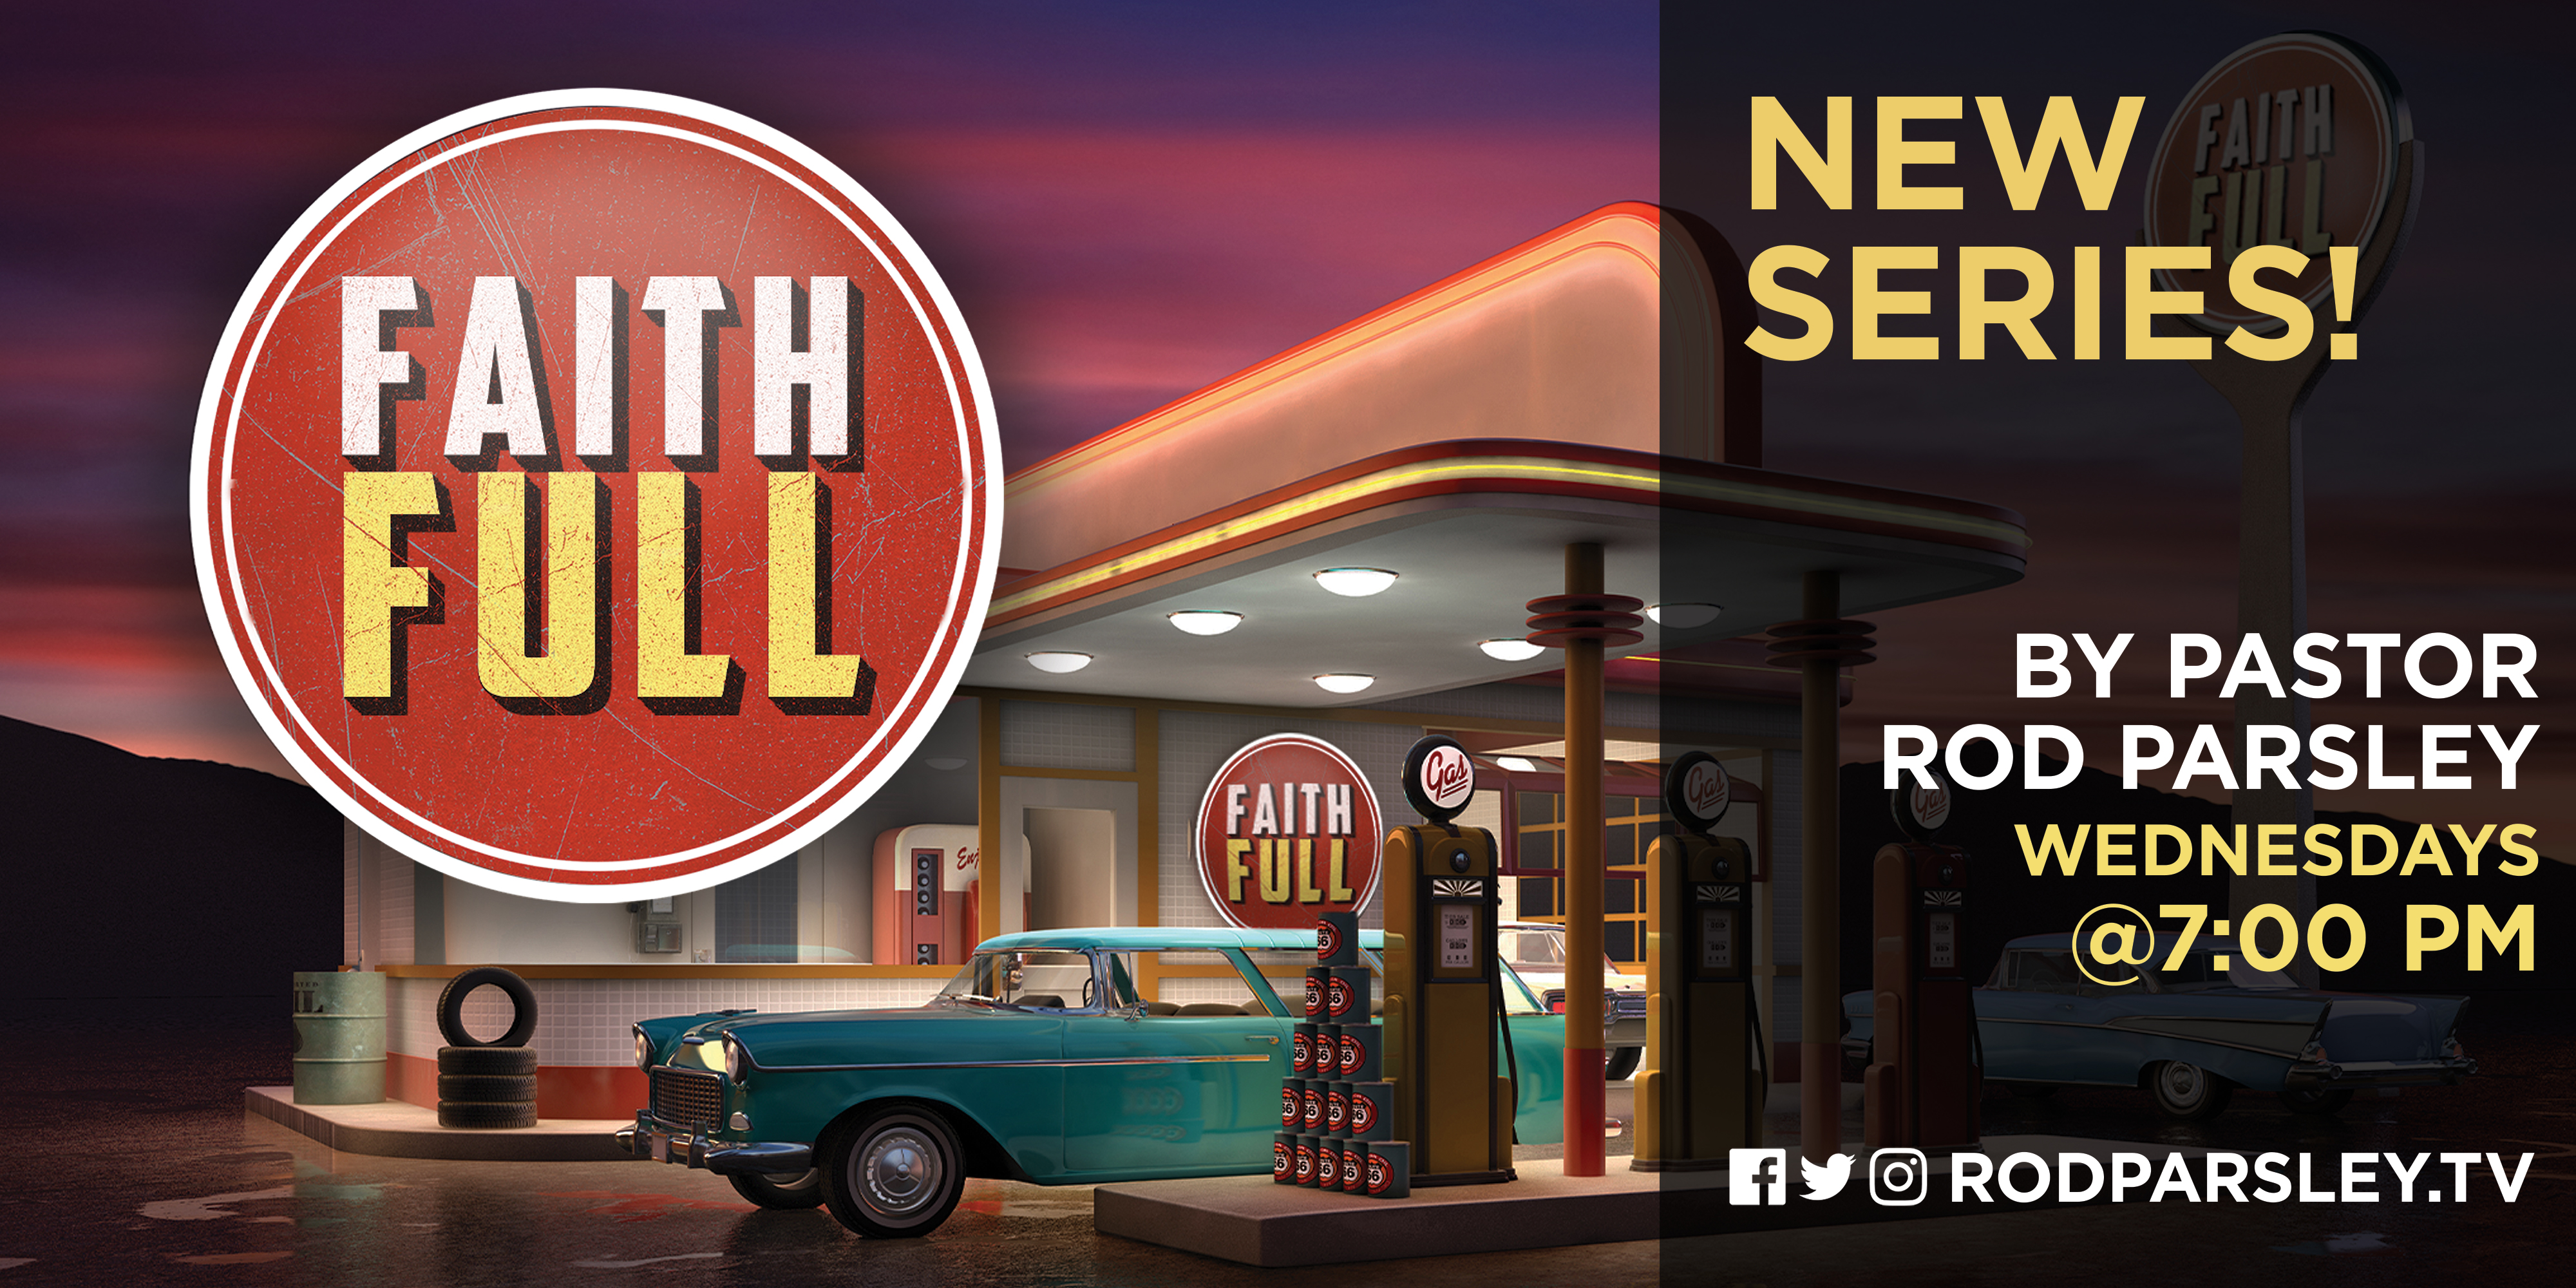 FaithFULL New Series By Pastor Rod Parsley Wednesday at 7PM Facebook Twitter Instagram Rodparsley.tv